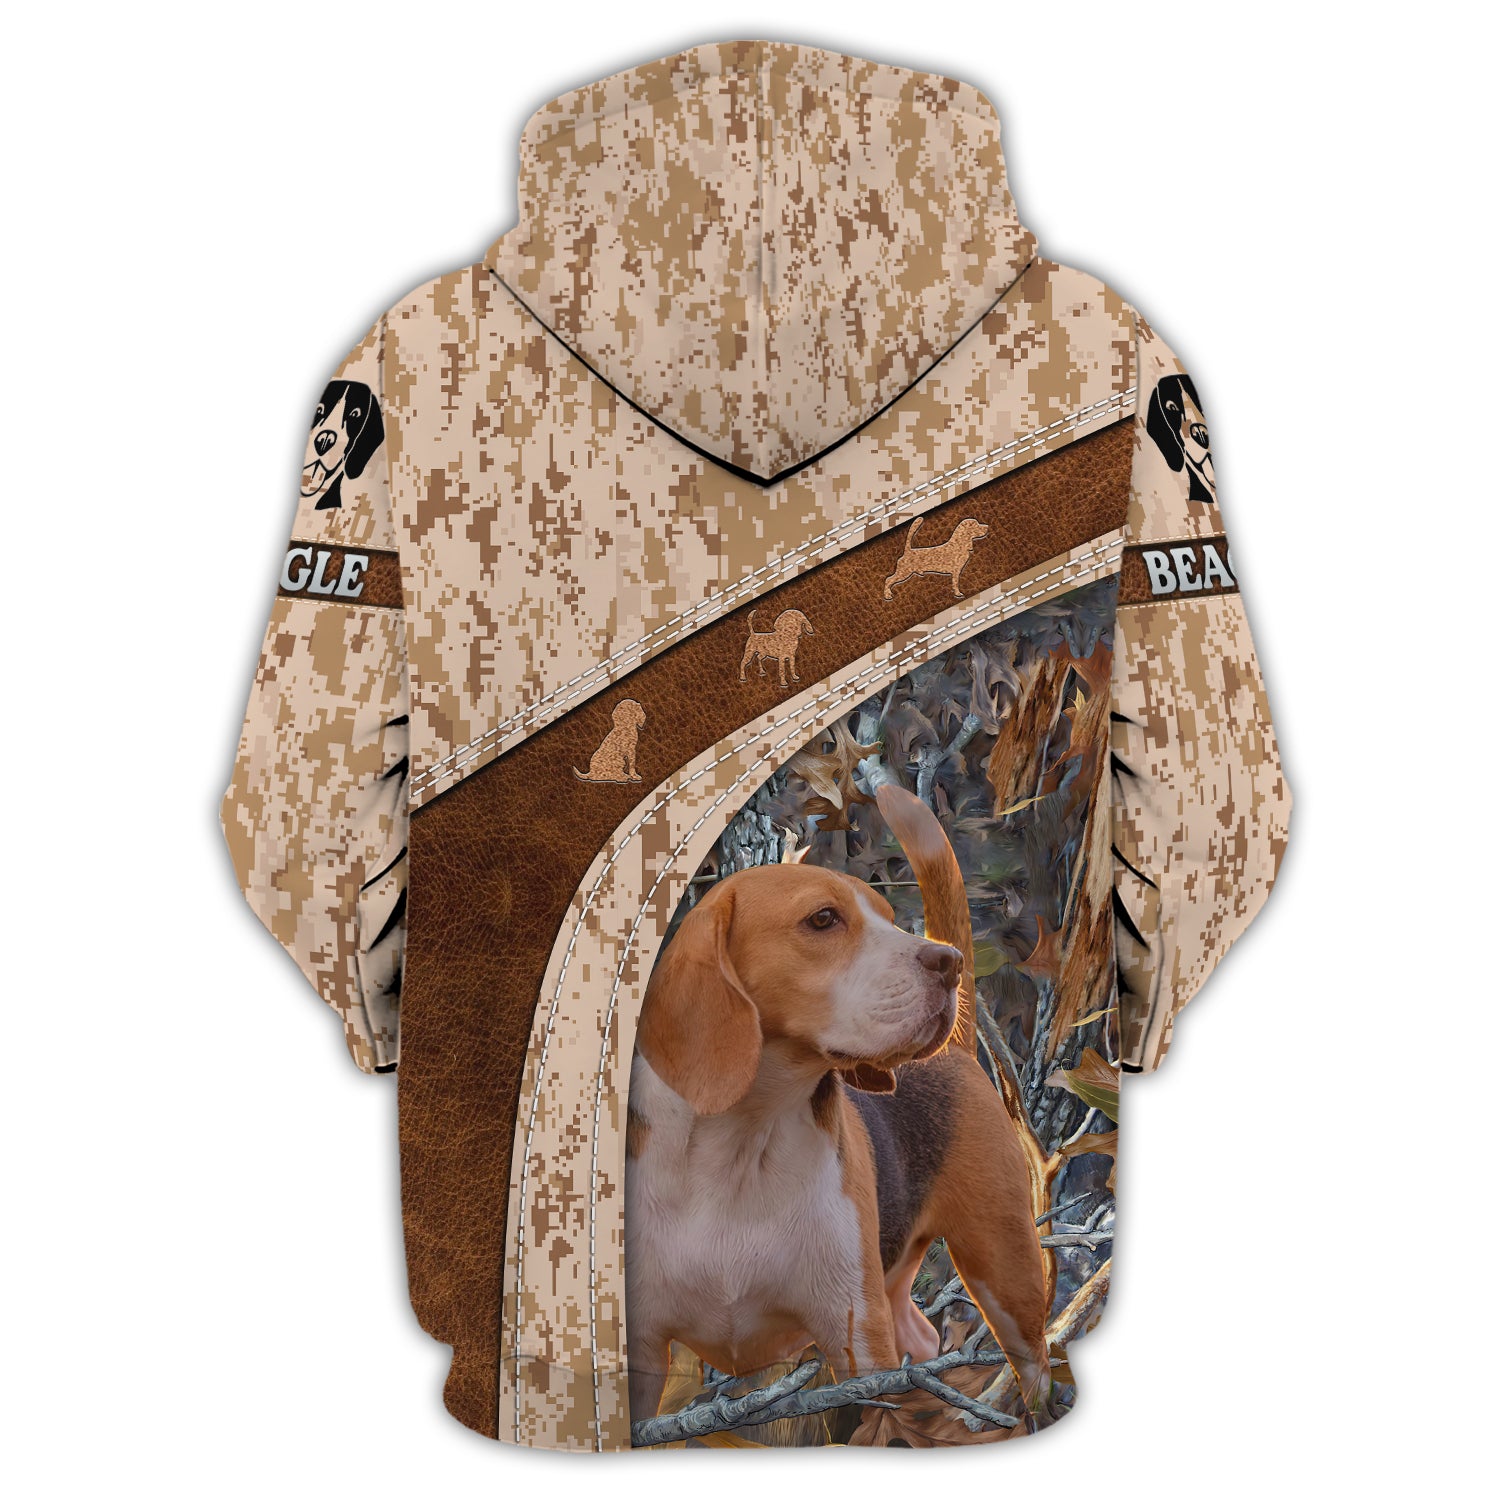 Rabbit Hunting - Beagle - Personalized Name 3D Zipper Hoodie 208 - TAD